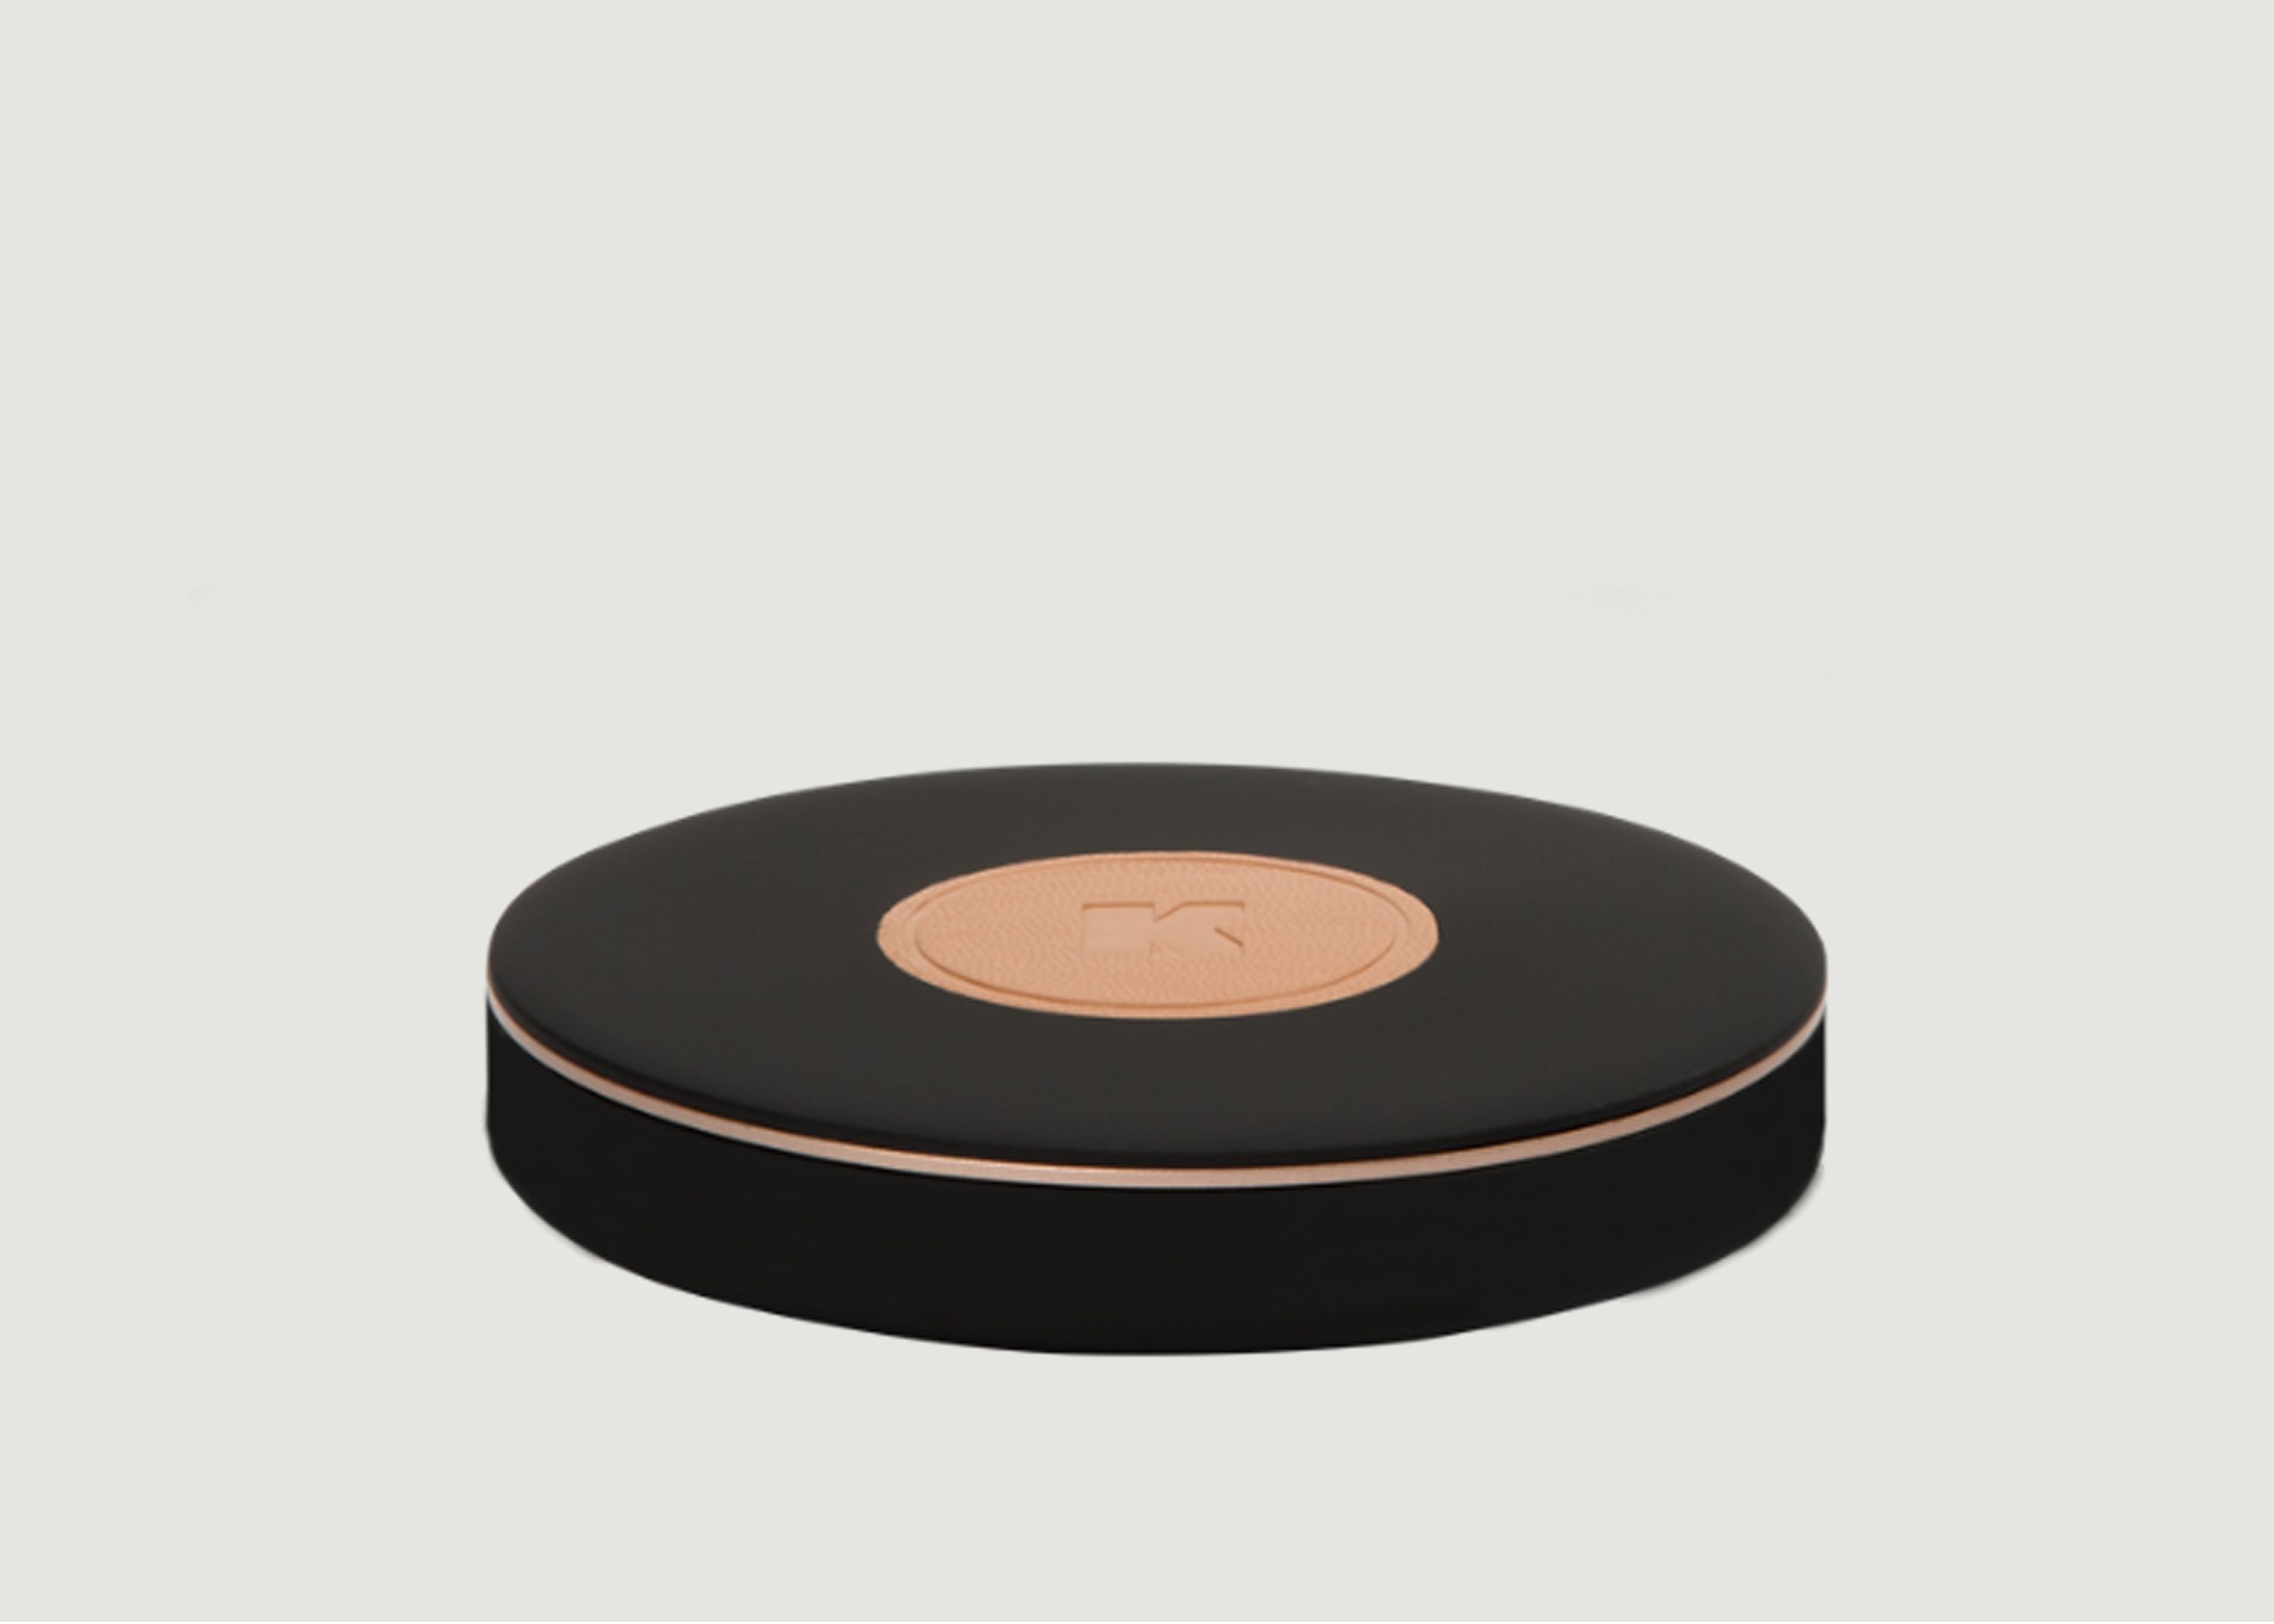 Contact-Based Wireless Charger - Kreafunk